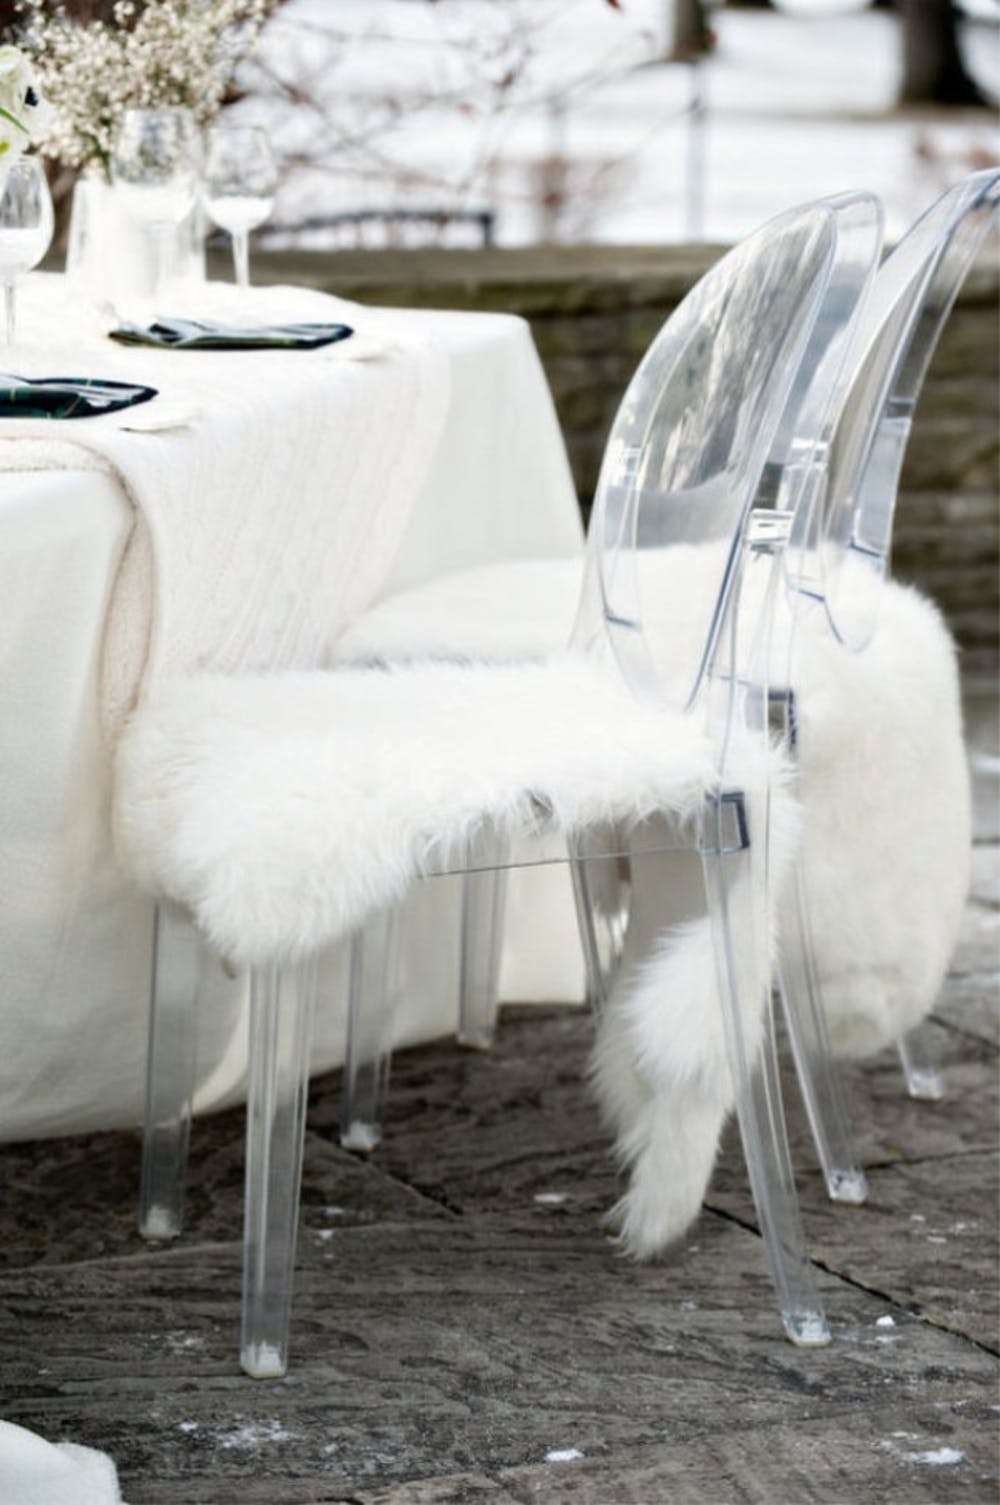 Rens Sheepskin Throws are what you need for a fall or winter wedding to keep the guests and yourself warm